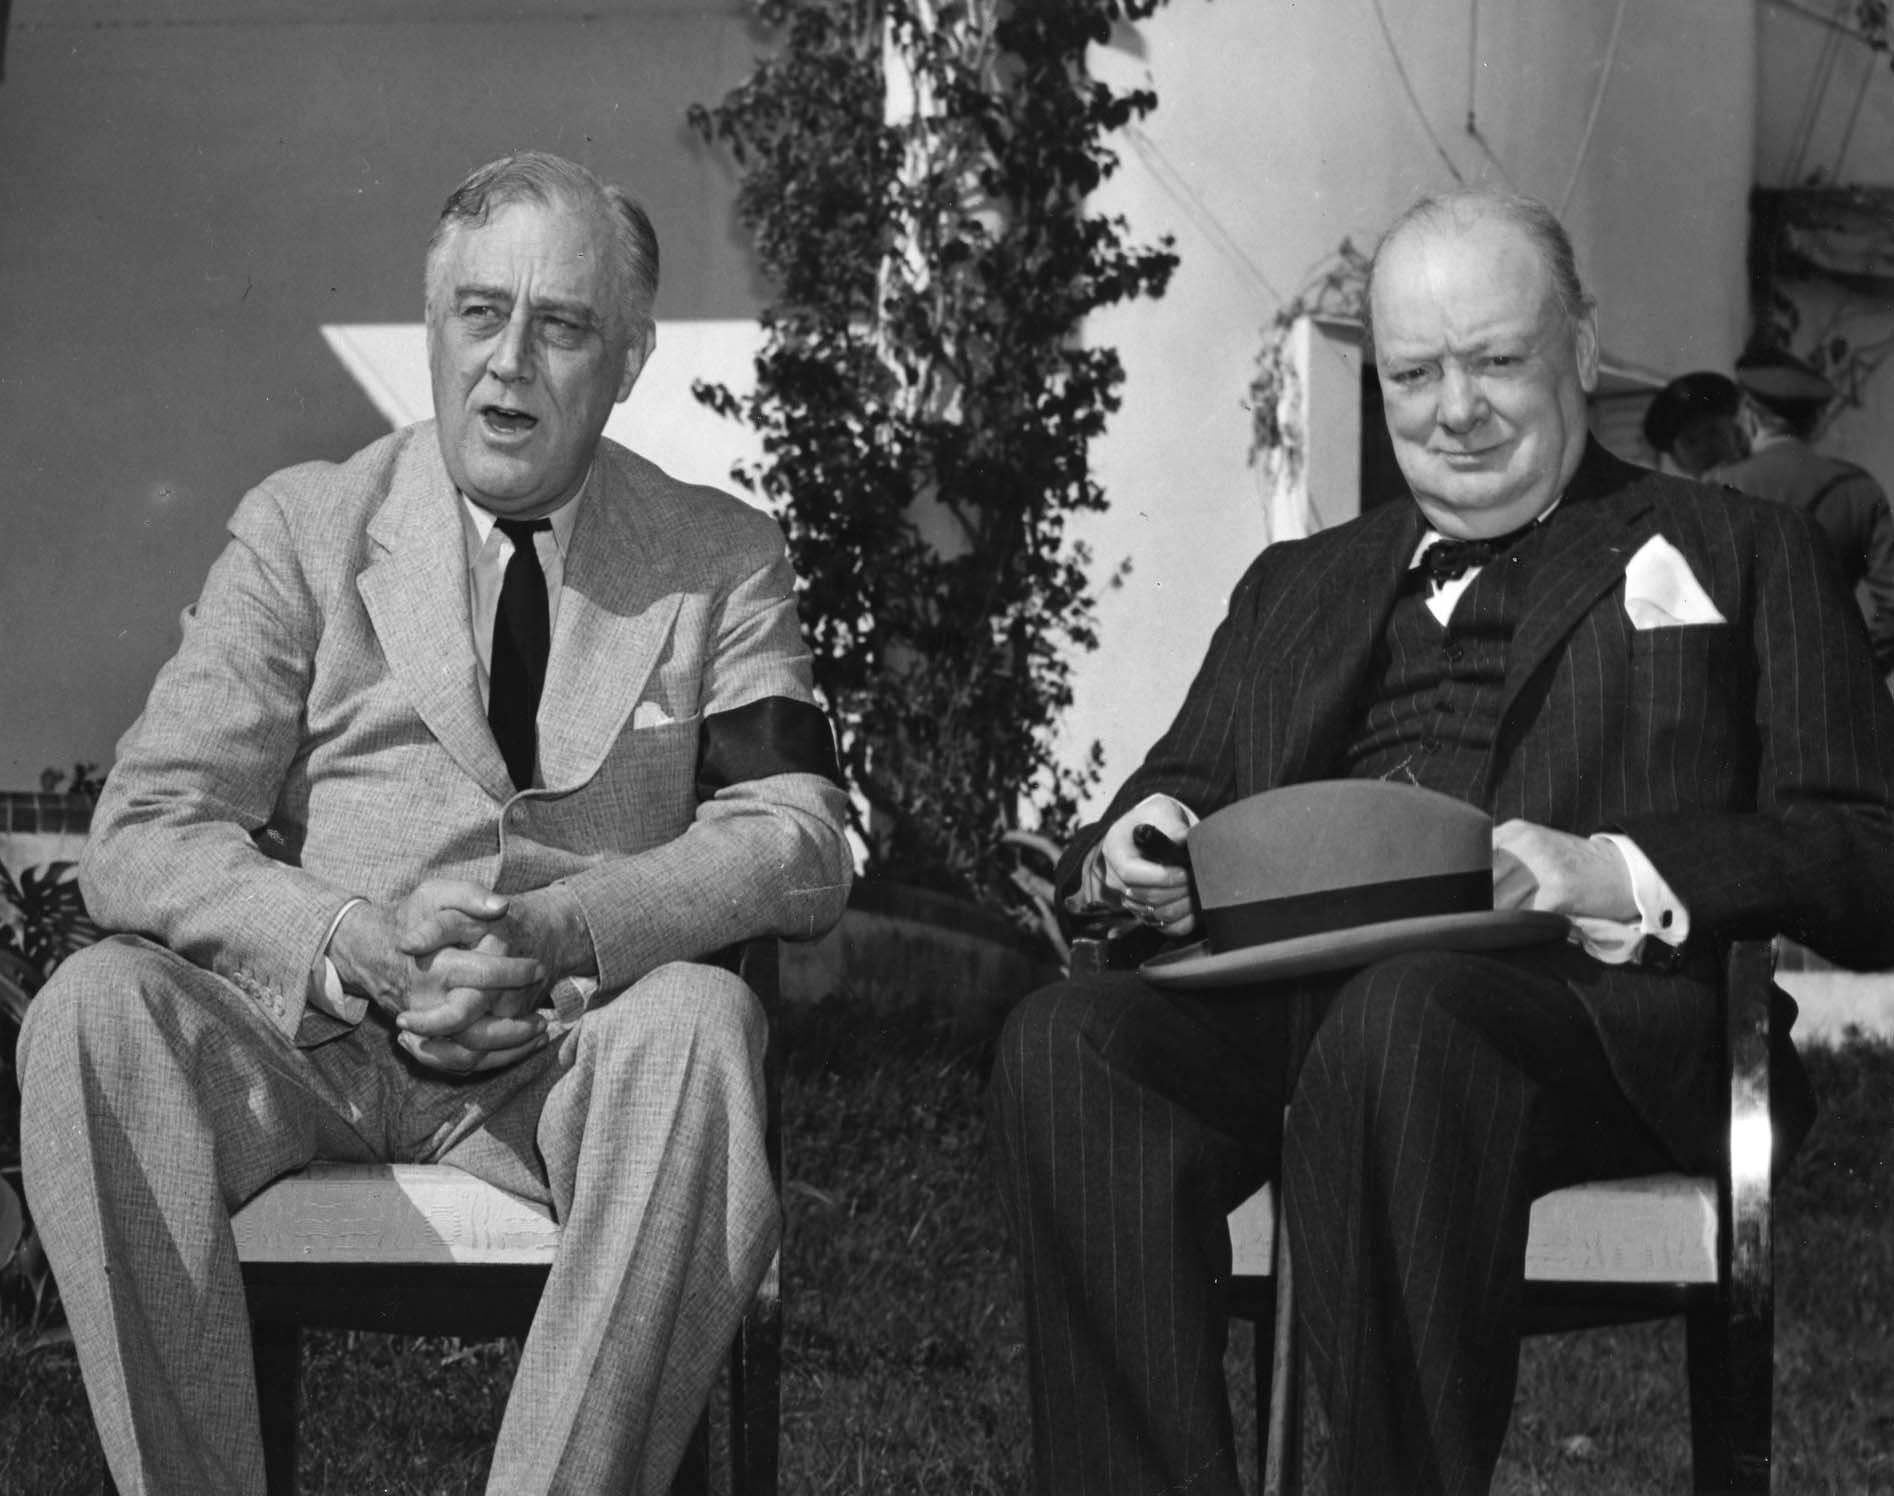 Franklin Roosevelt and Winston Churchill pose for photographs in the gardens of Roosevelt’s Villa Dar es Saada in the Anfa neighborhood of Casablanca, French Morocco during the Casablanca Conference, 24 Jan 1943.